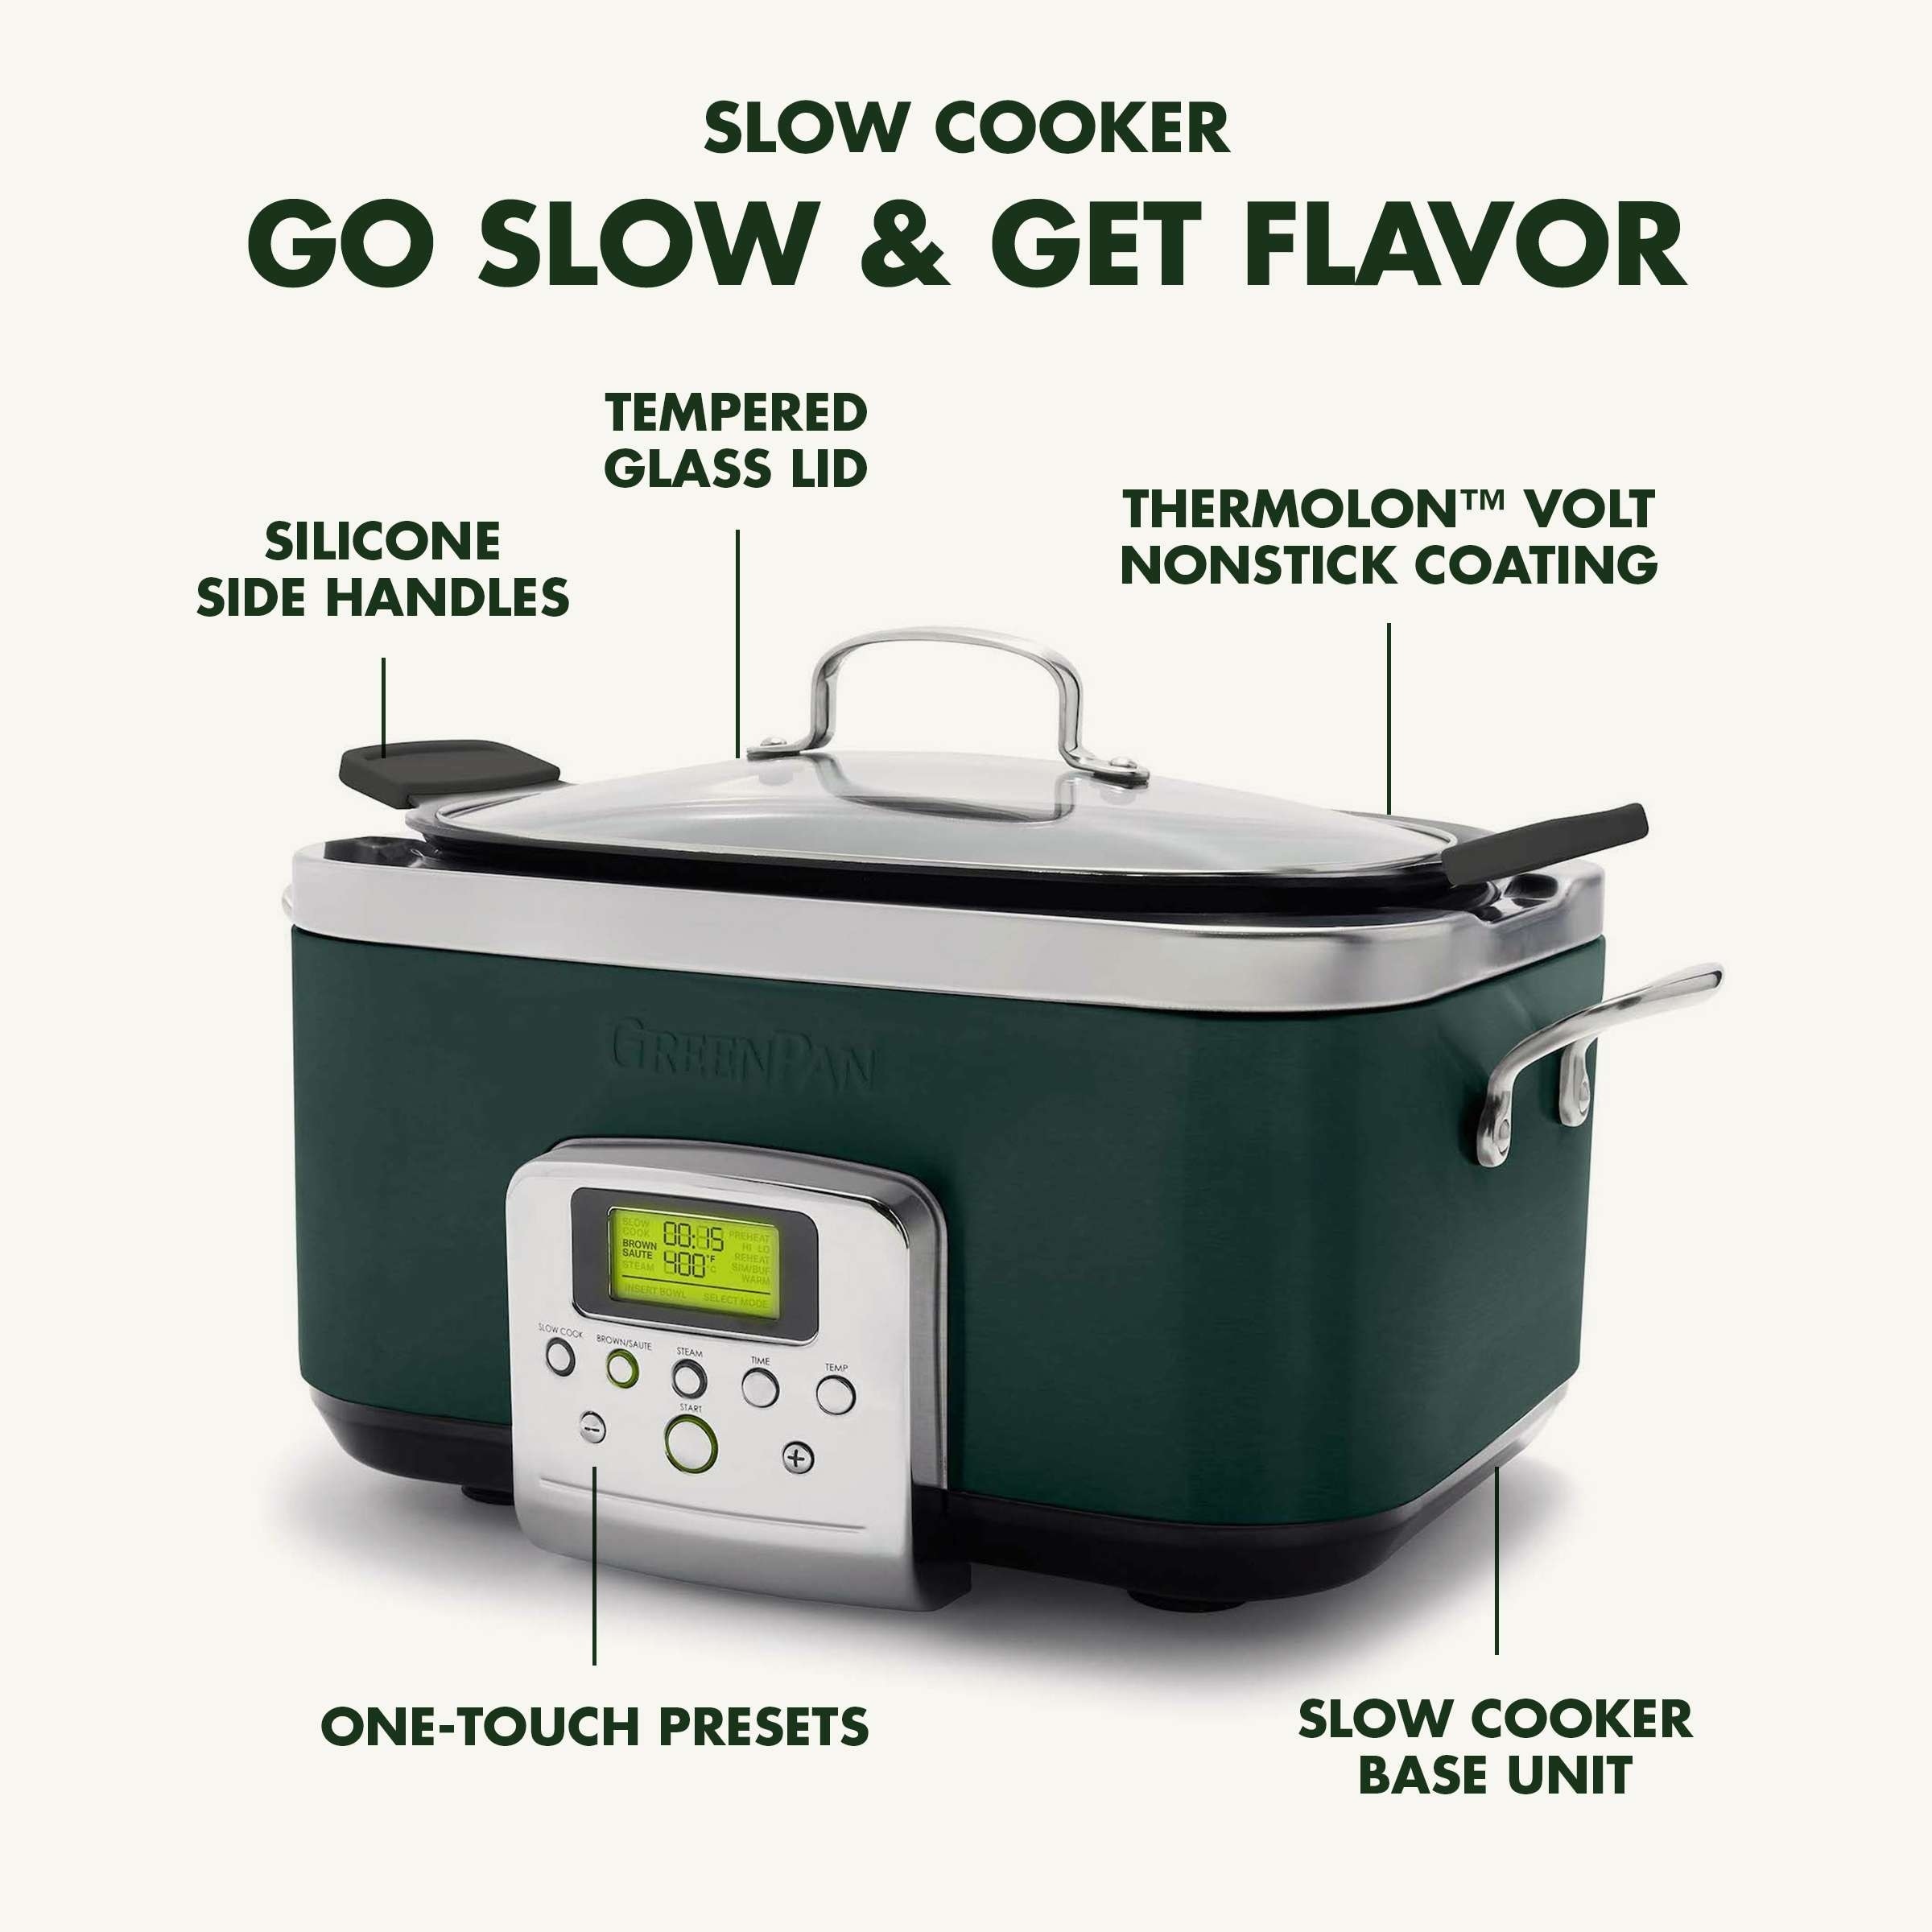 BLACK+DECKER 6.5-Quart Stainless Steel Oval Slow Cooker at